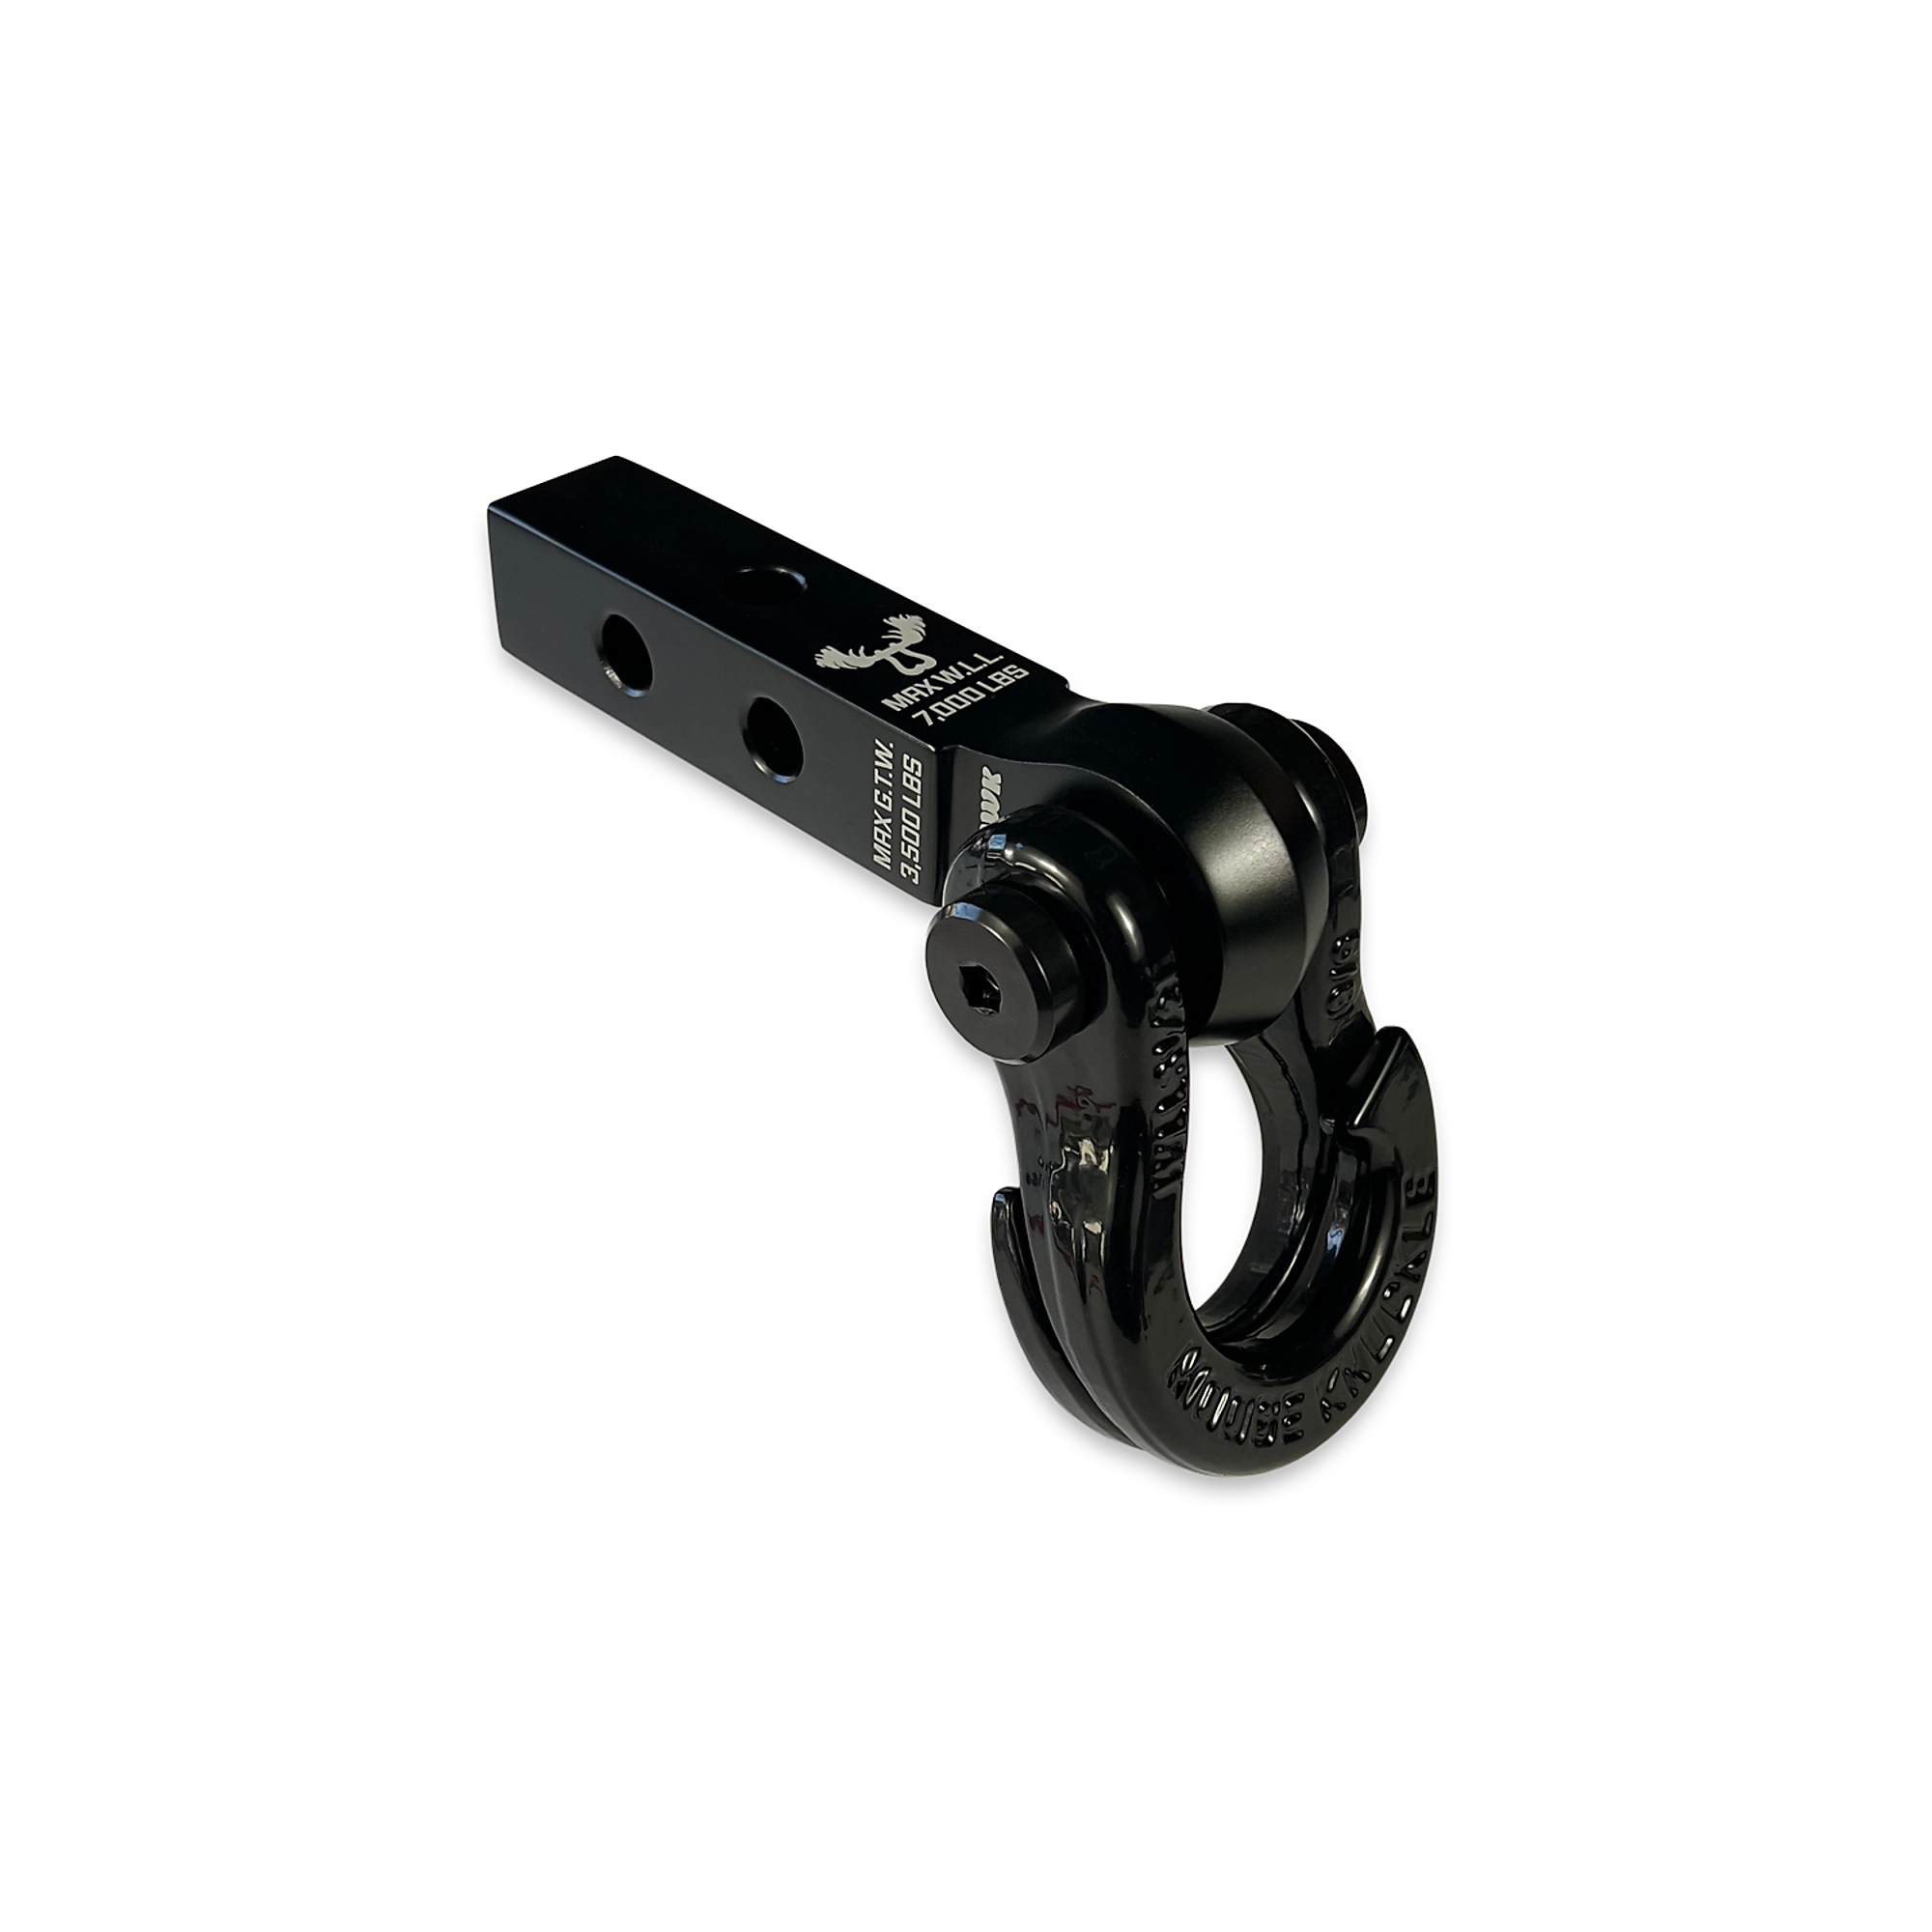 Moose Knuckle Offroad, 5/8 Jowl Split Shackle and Mohawk 1.25 Receiver Combo, Gross Towing Weight 3500 lb, Class Rating Class II, Model FN000042-009